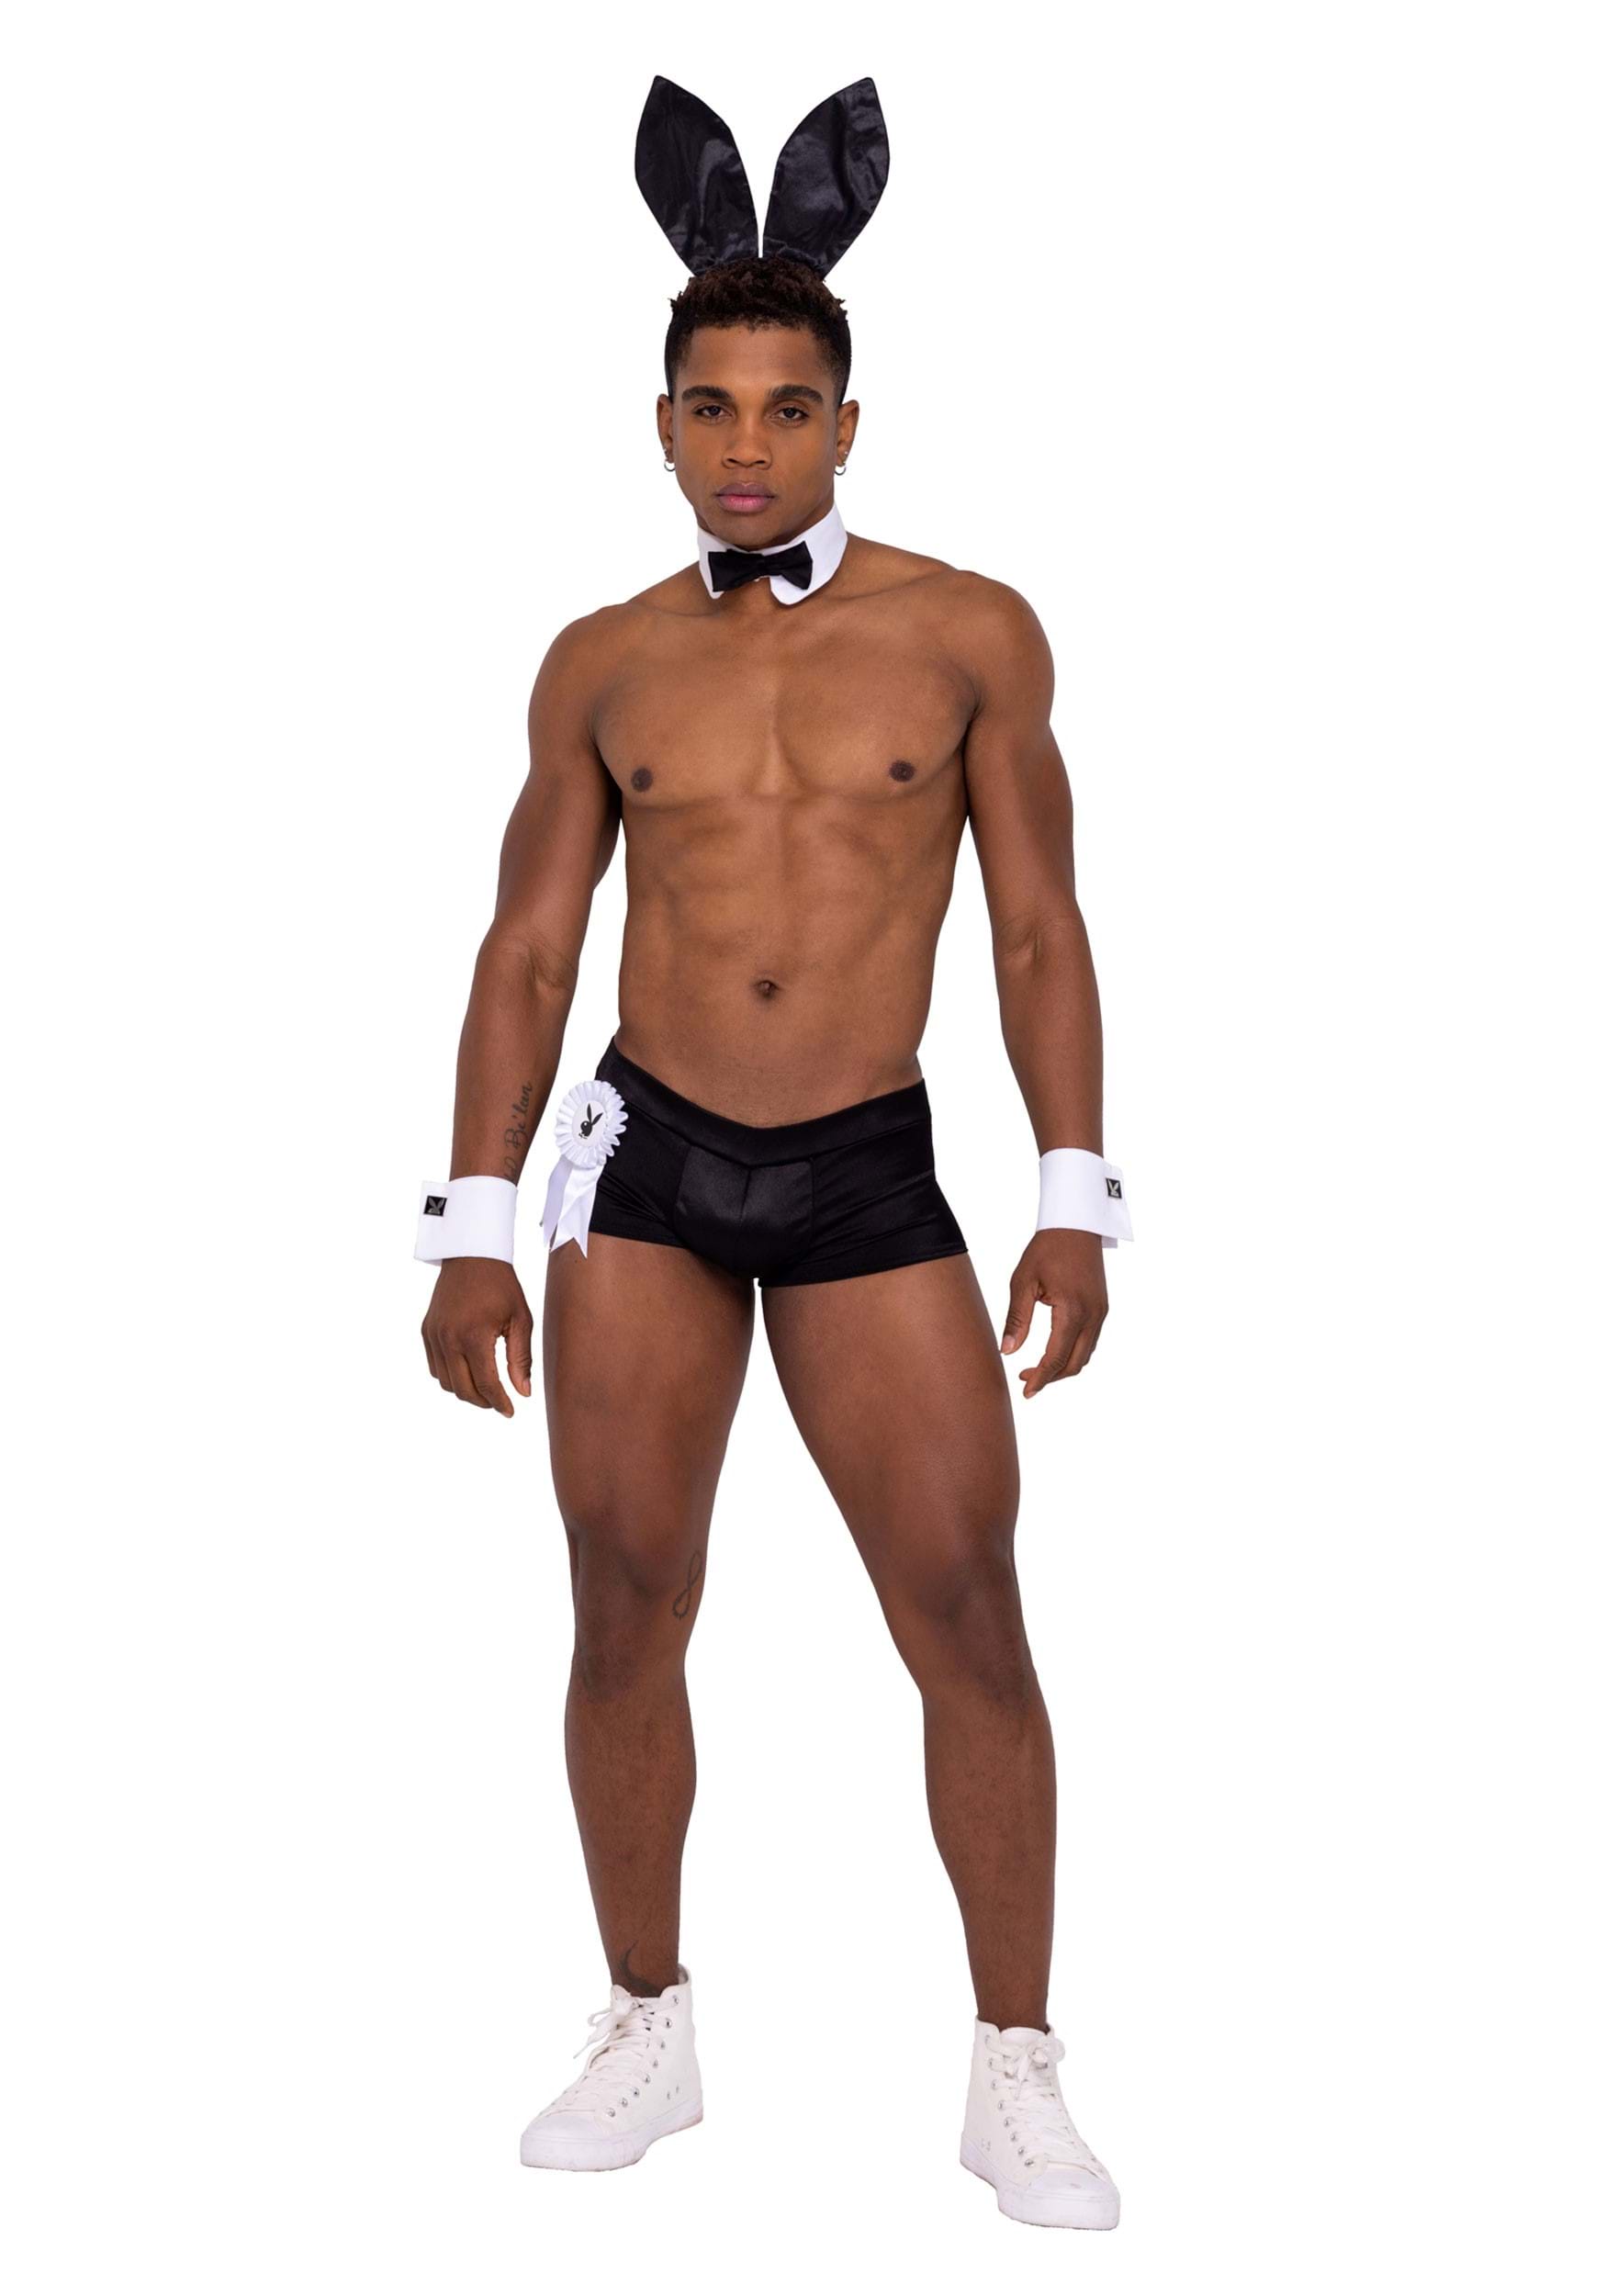 Image of Men's Playboy Hunky Playmate Costume | Playboy Bunny Costumes ID ROPB154-XL